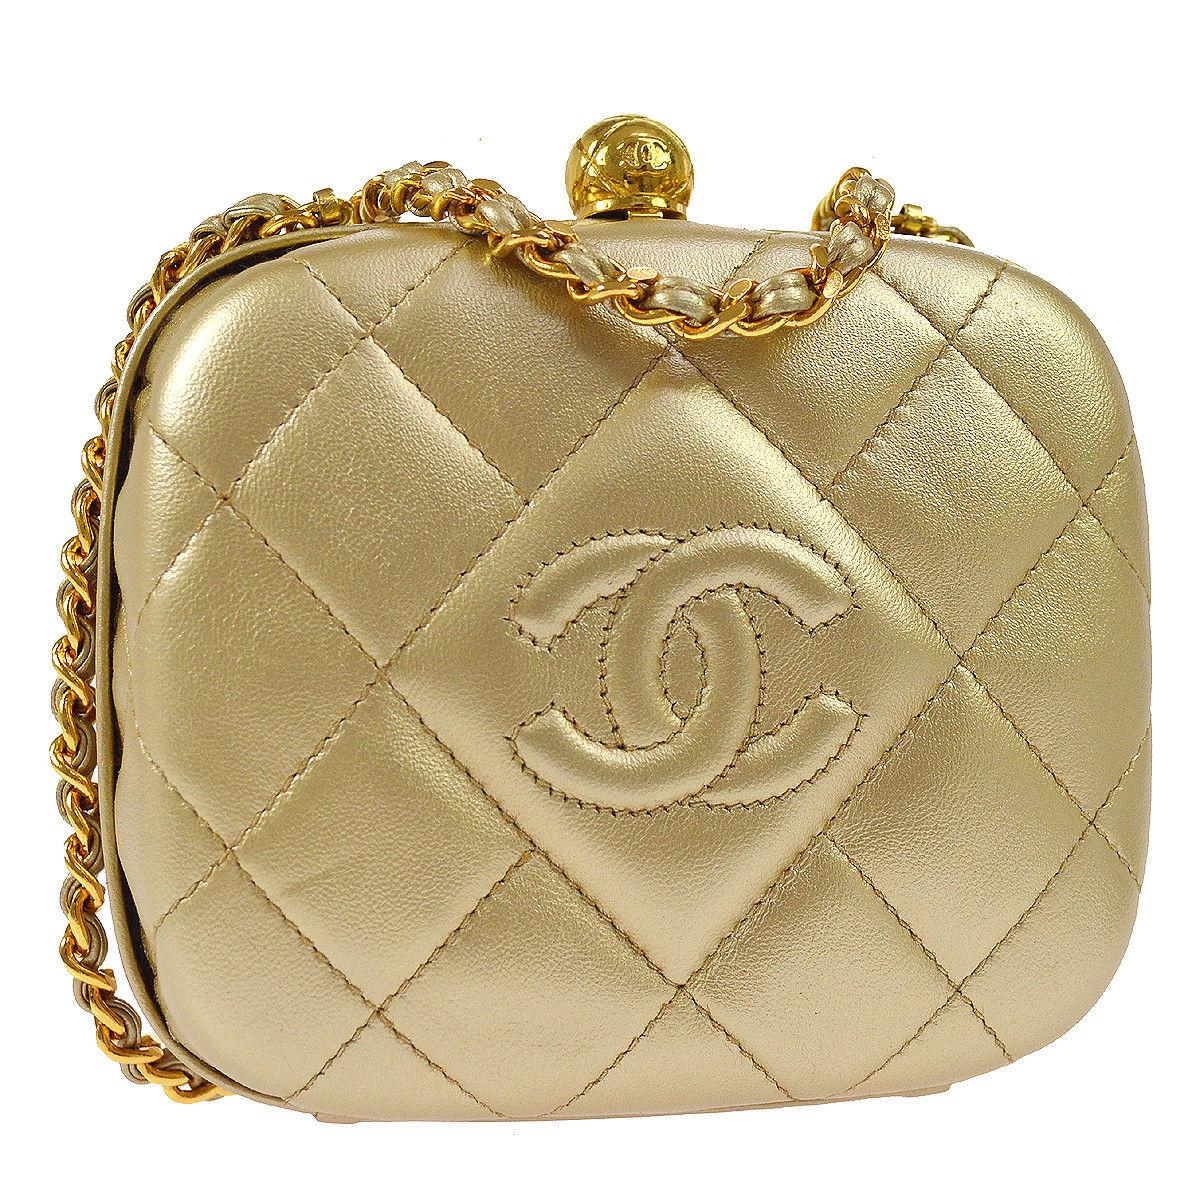 Chanel Chanel Metallic Gold Quilted Patent Leather CC Logo Kisslock